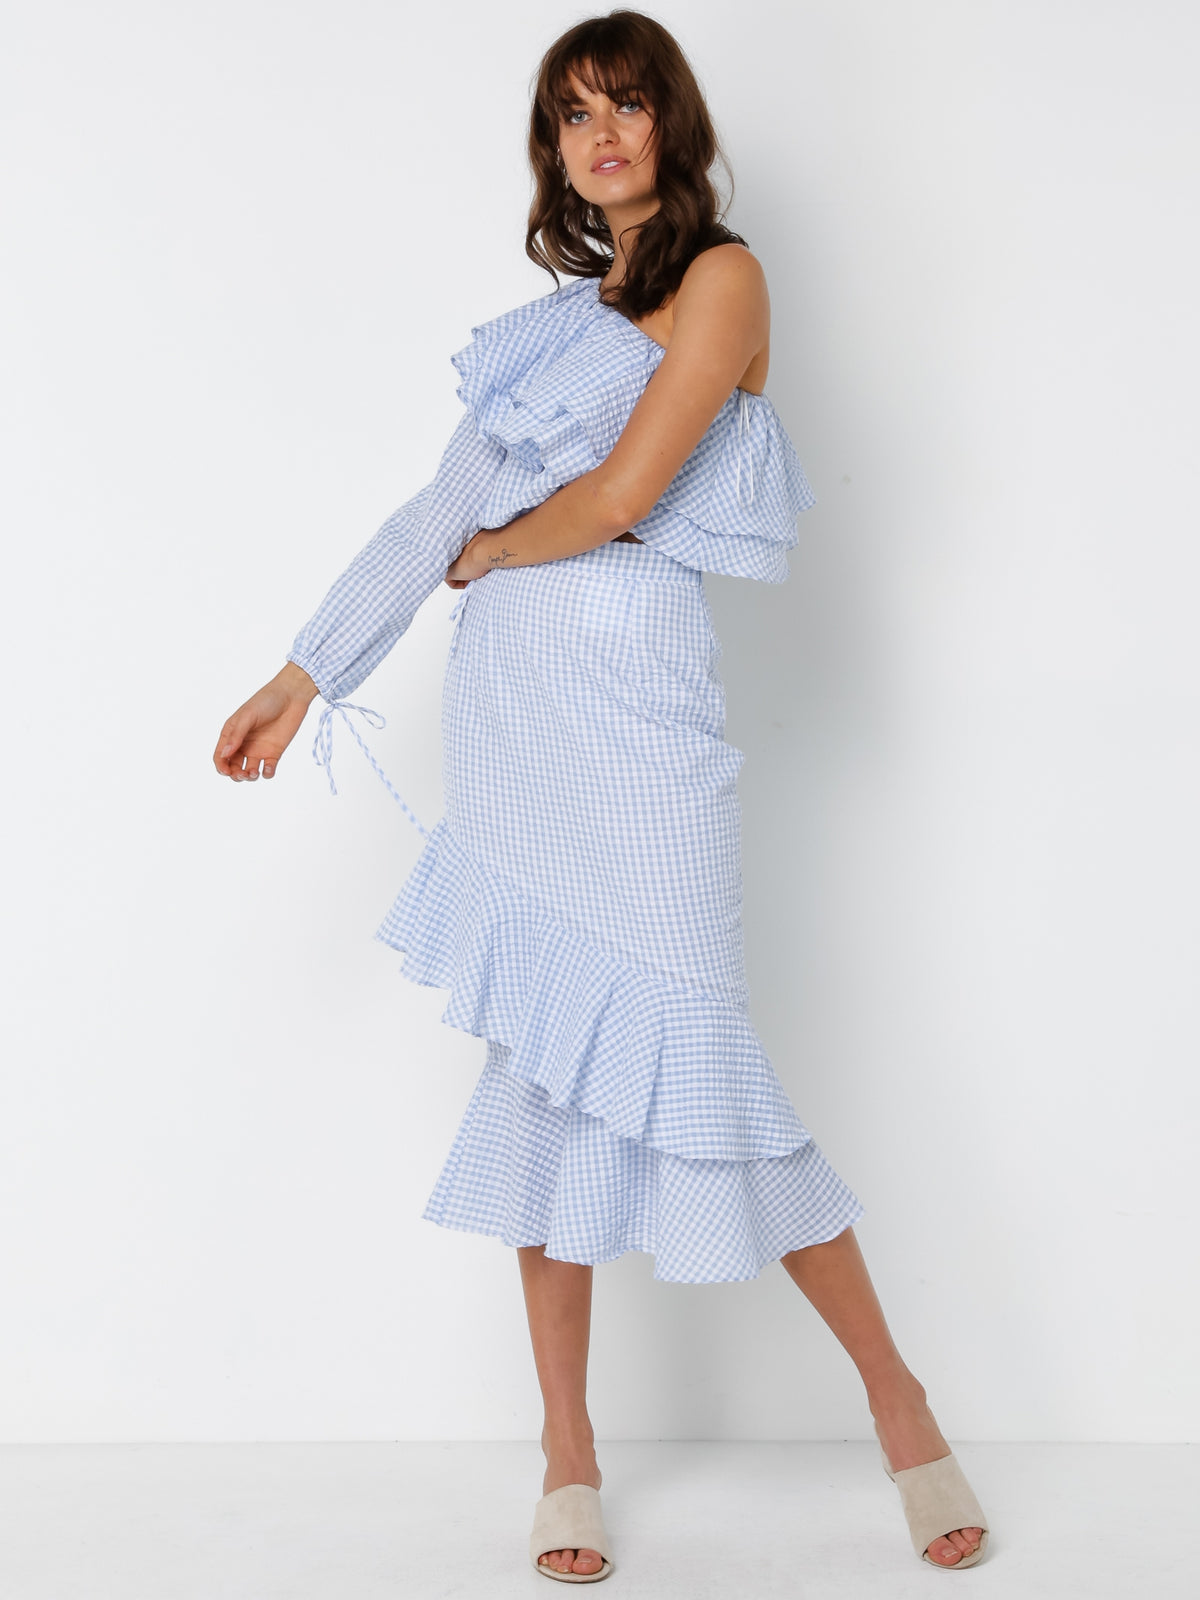 Lola One Shoulder Top in Blue &amp; White Gingham